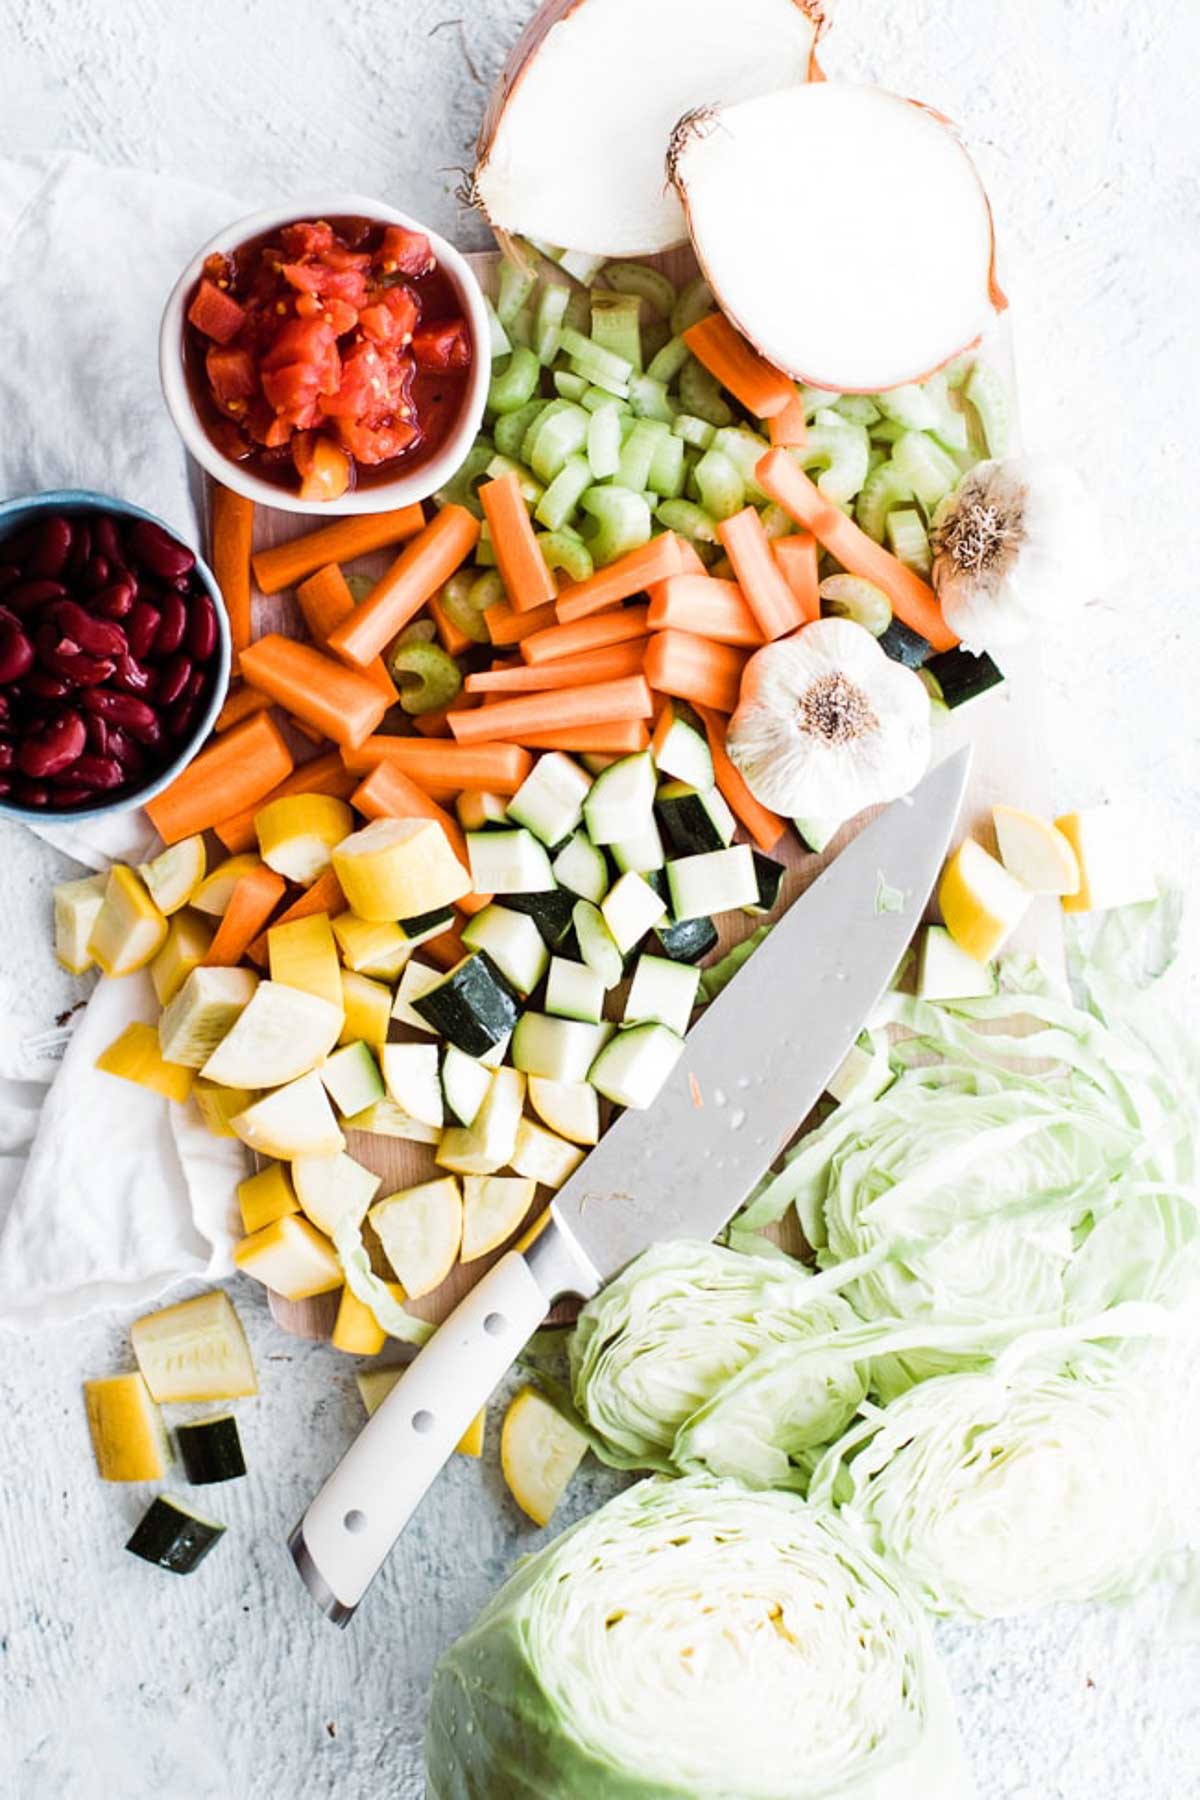 Ingredients for diet soup on cutting board with chef knife